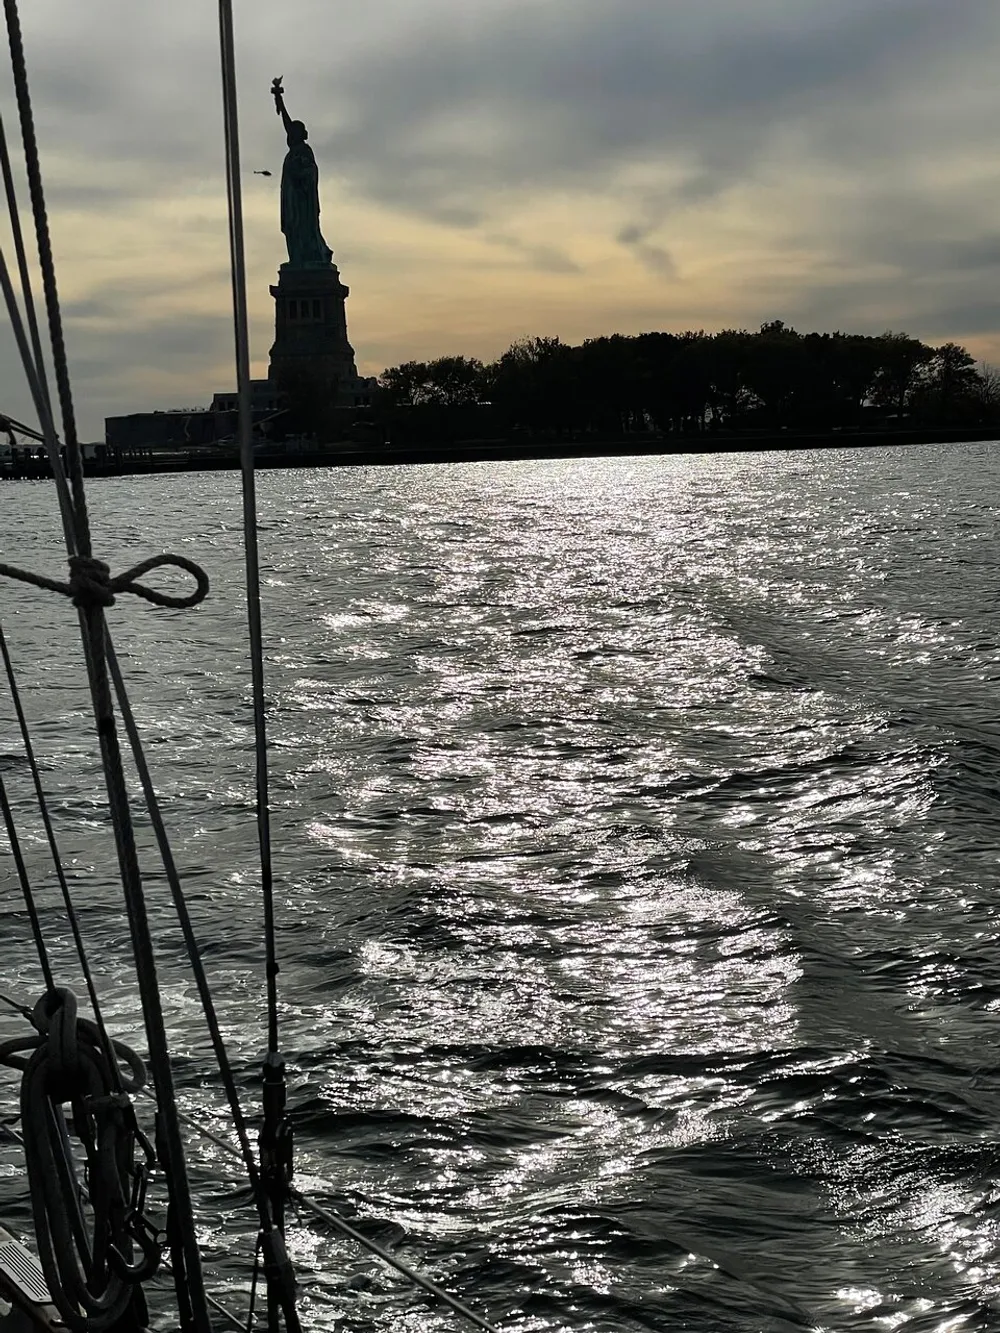 The image captures a view of the Statue of Liberty at sunset from the perspective of a boat with shimmering waters in the foreground and the silhouette of the statue against a cloudy sky in the background